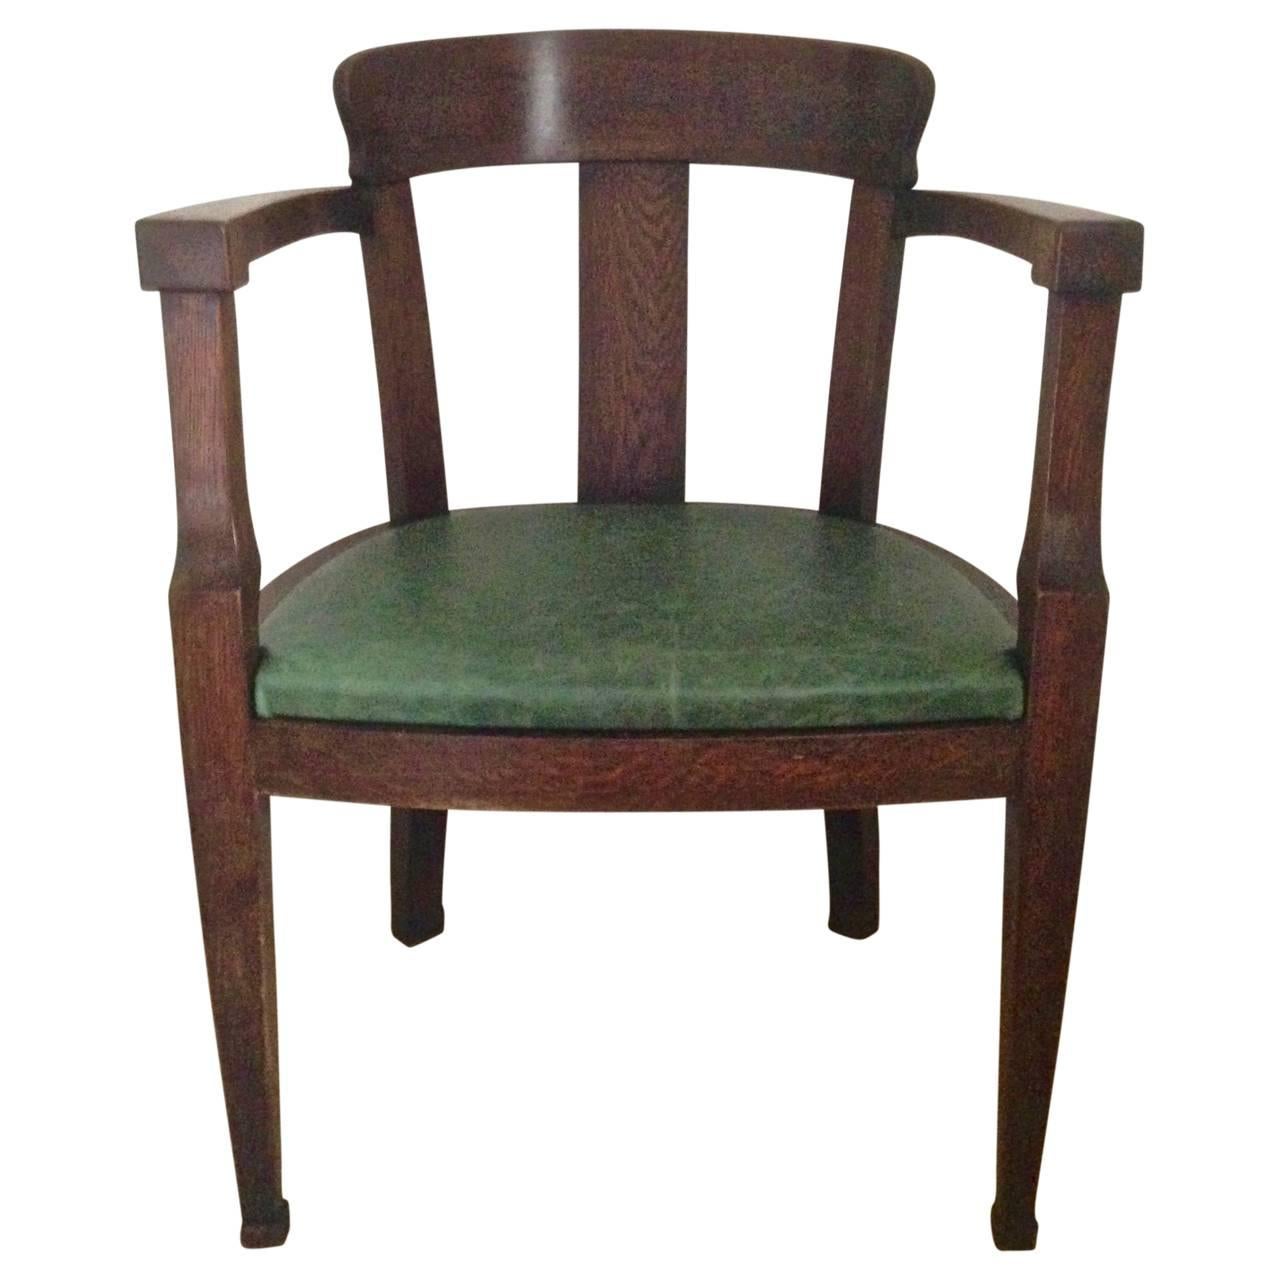 Beautiful dark solid oak Art Deco desk chair with newly upholstered green vintage leather.